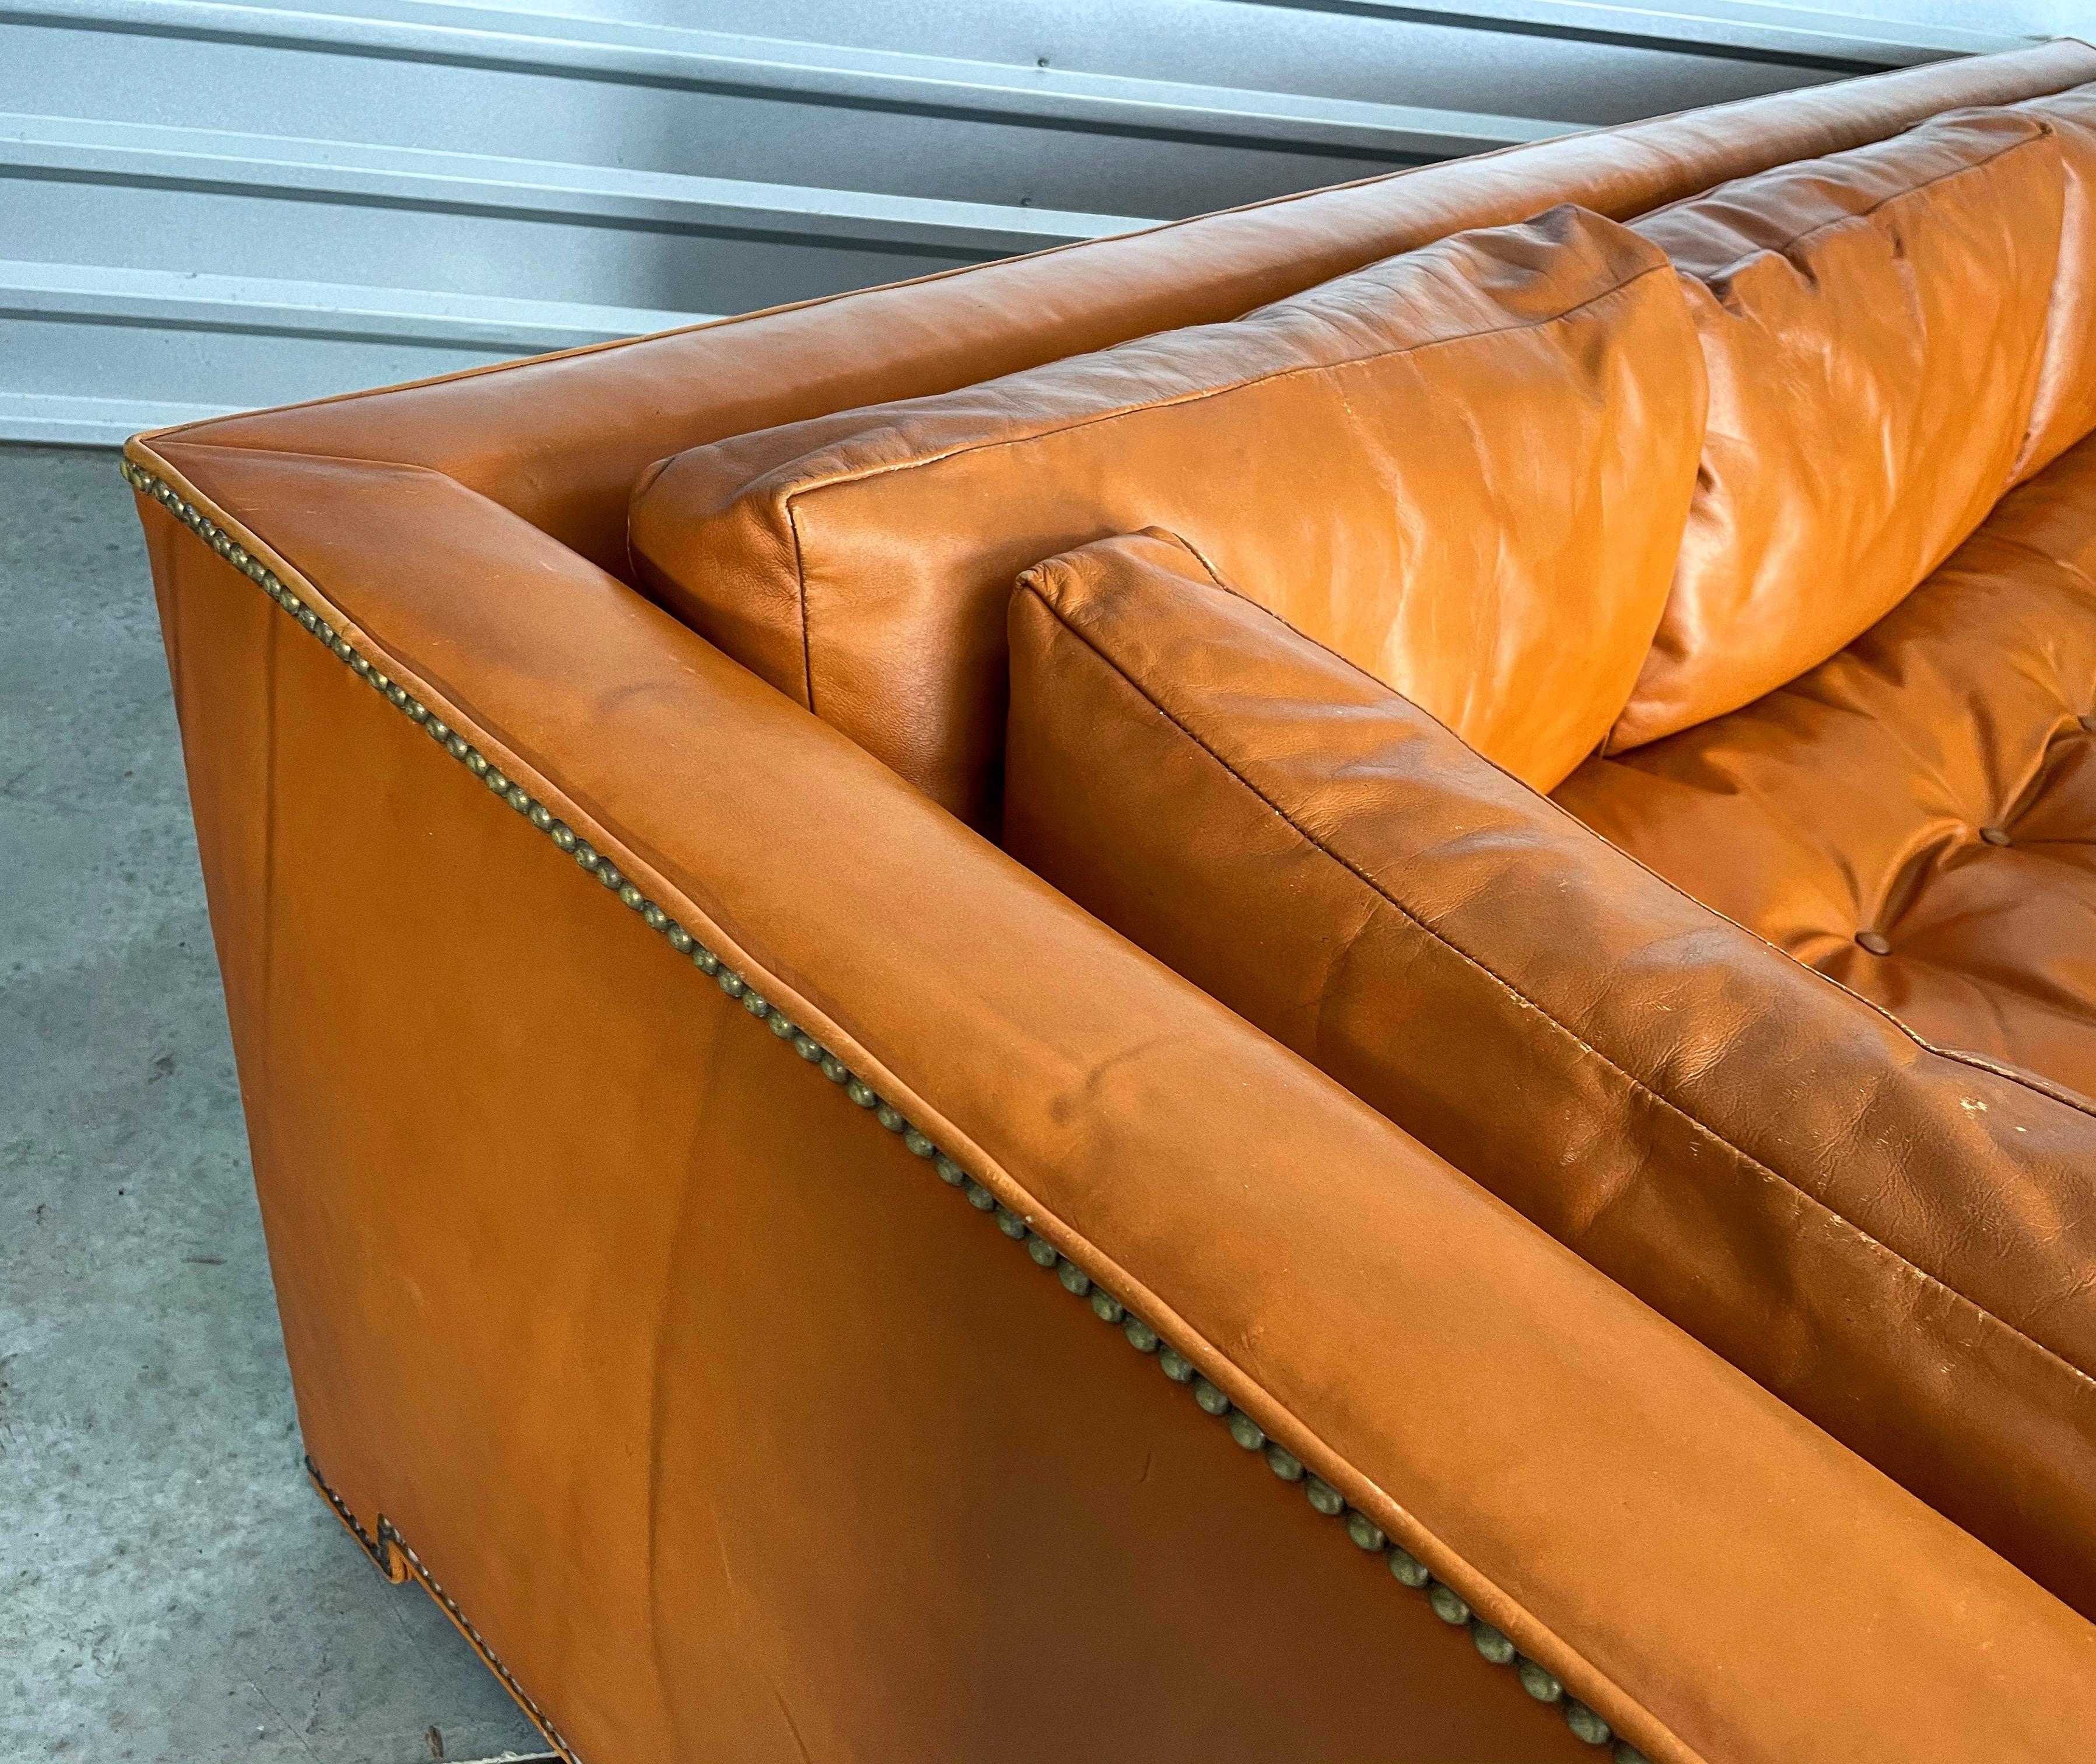 Brass Midcentury Parsons Sofa by John Widdicomb in Original Cognac Leather and Down